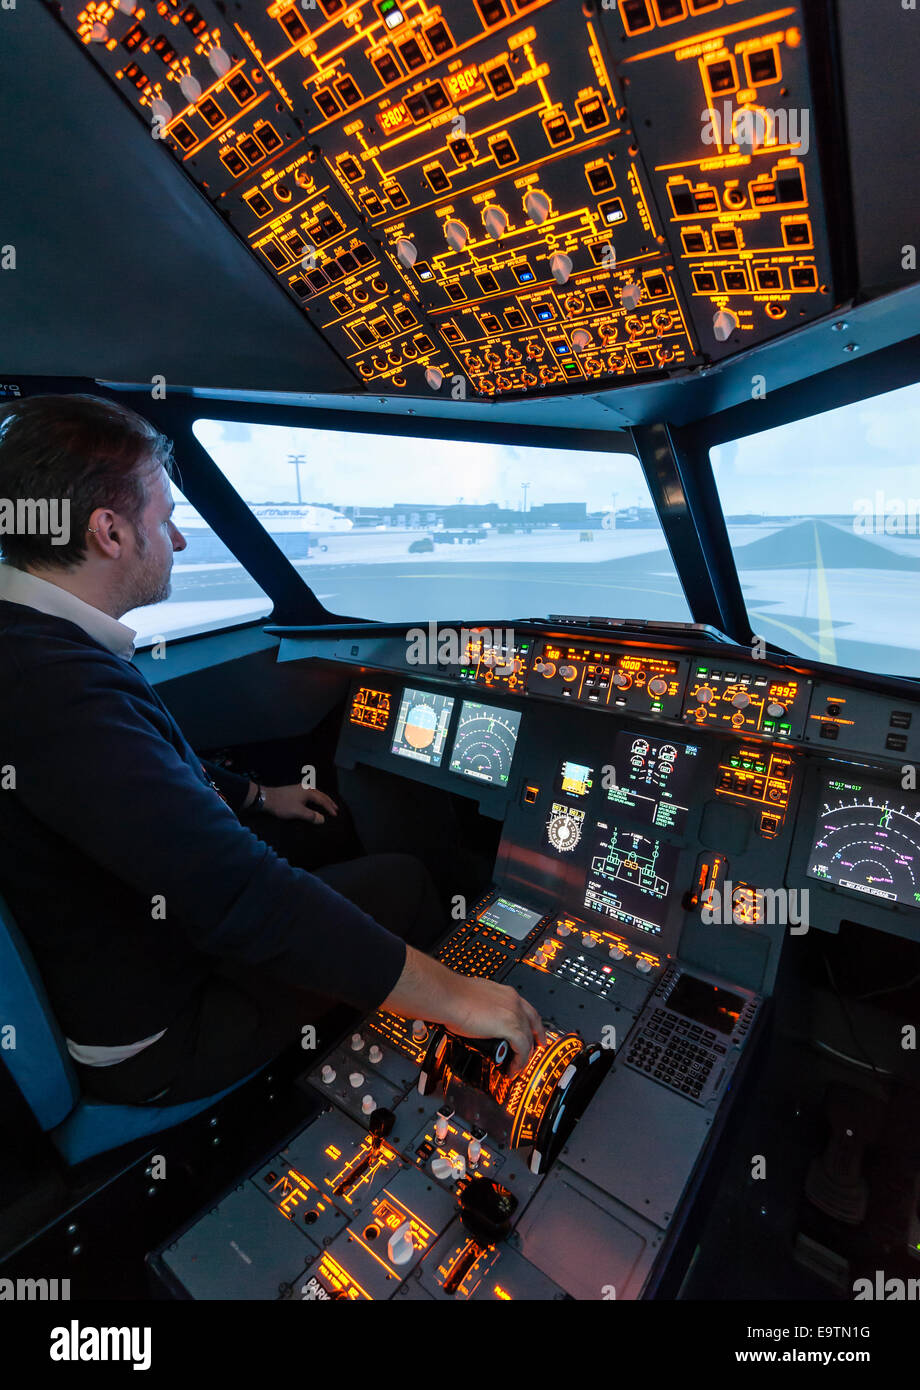 Cockpit of an Airbus A320 flight simulator that is used for training of professional airline pilots (preparing takeoff) Stock Photo